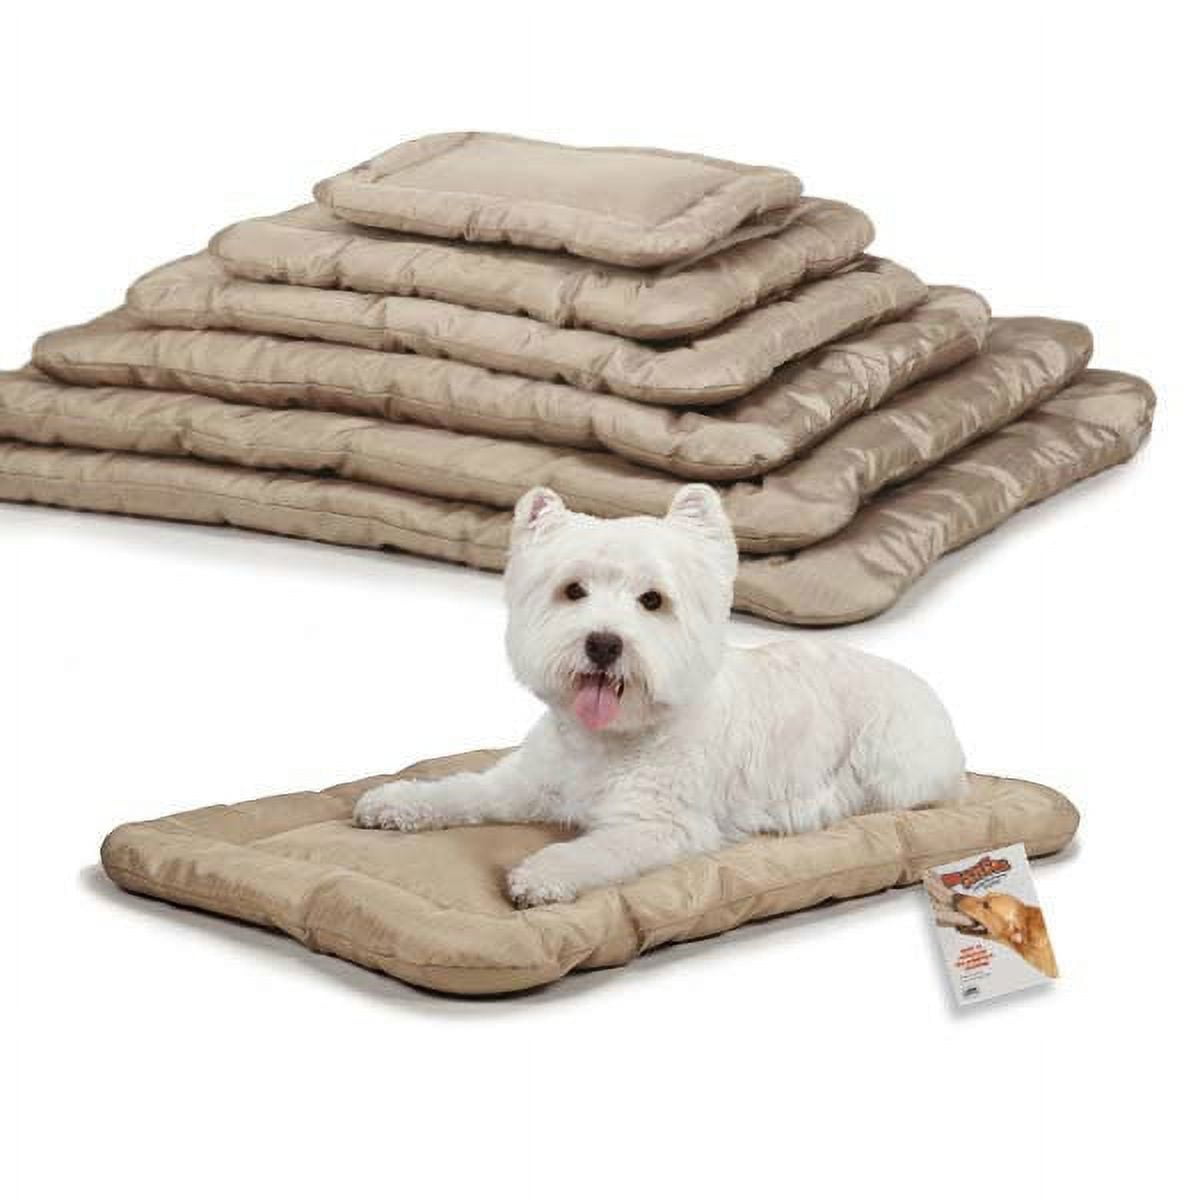 Indestructible Dog Bed for Crate Chew Proof for Agressive Chewers,48 inch  Dog Crate Bed chew Proof Heavy Duty Large Dog Crate Bed with Removable